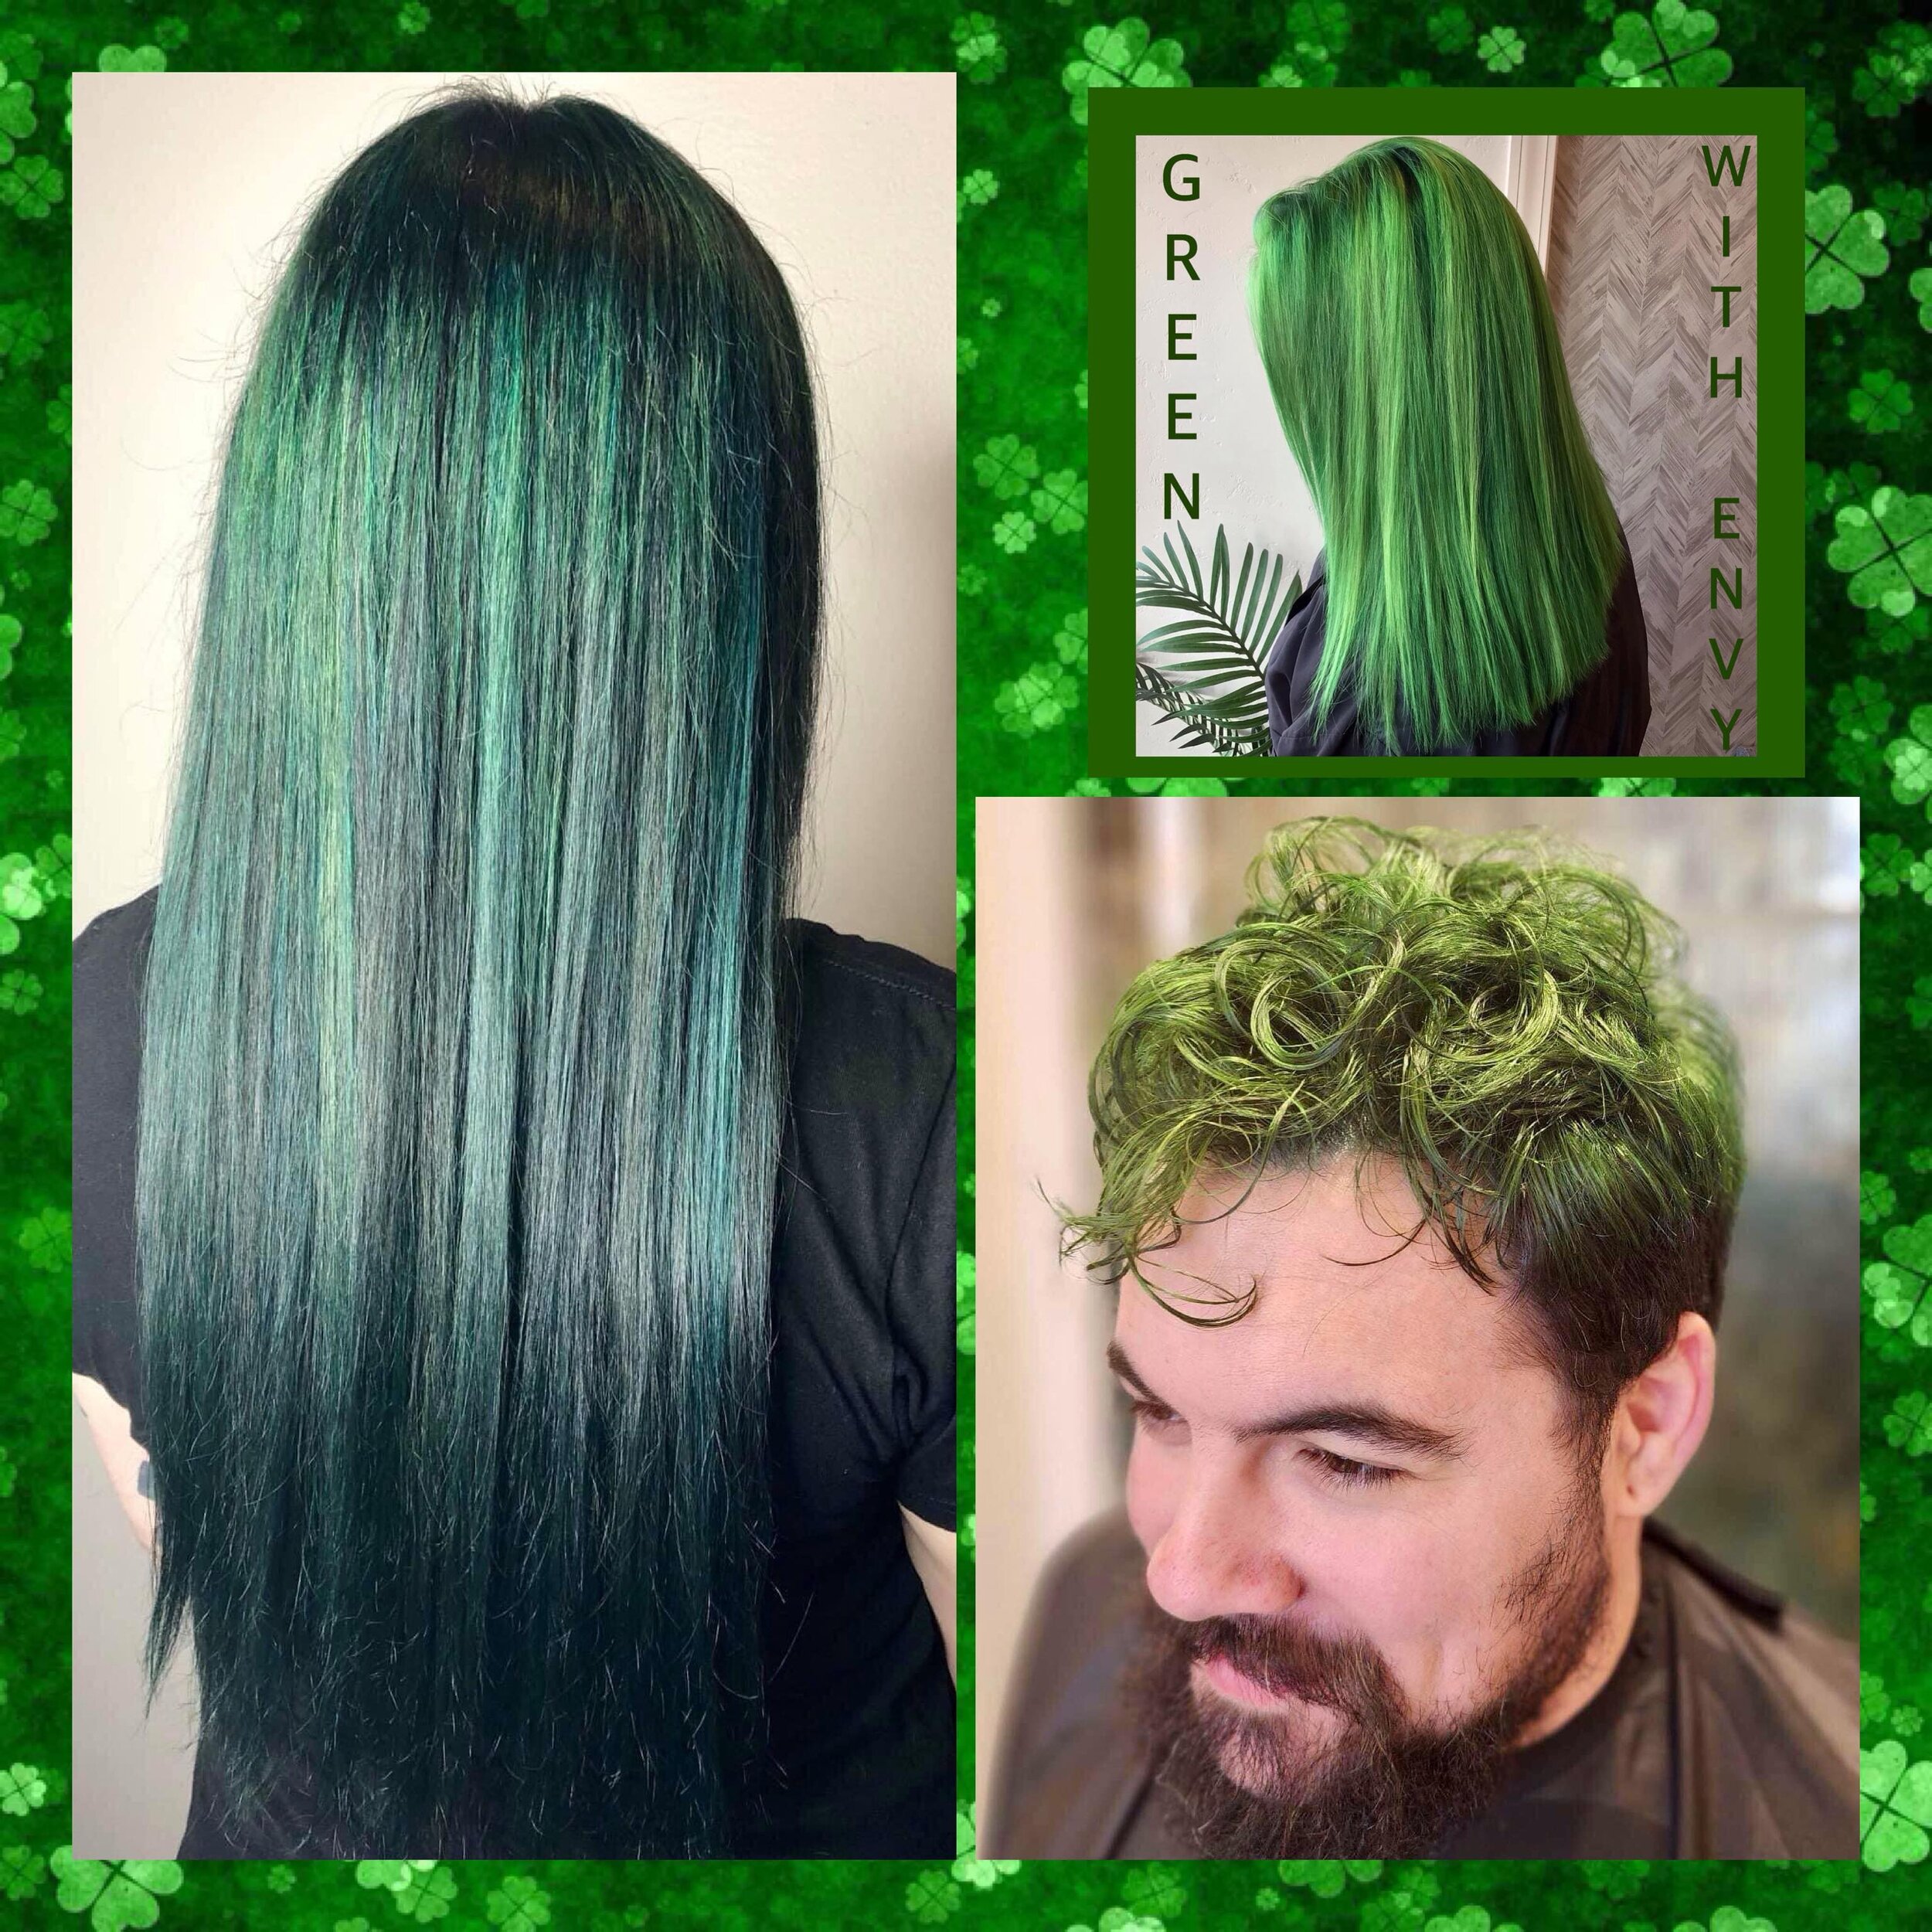 🍀Hello March💚 This is one of our favorite busy seasons! Space is limited and appointments are booking up fast! Please contact us ASAP 💚 Cindy 732-516-8150 Michelle 732-259-7946 @theartistryofjustcin @michellerose_hair #theartistry2020nj #redken #r